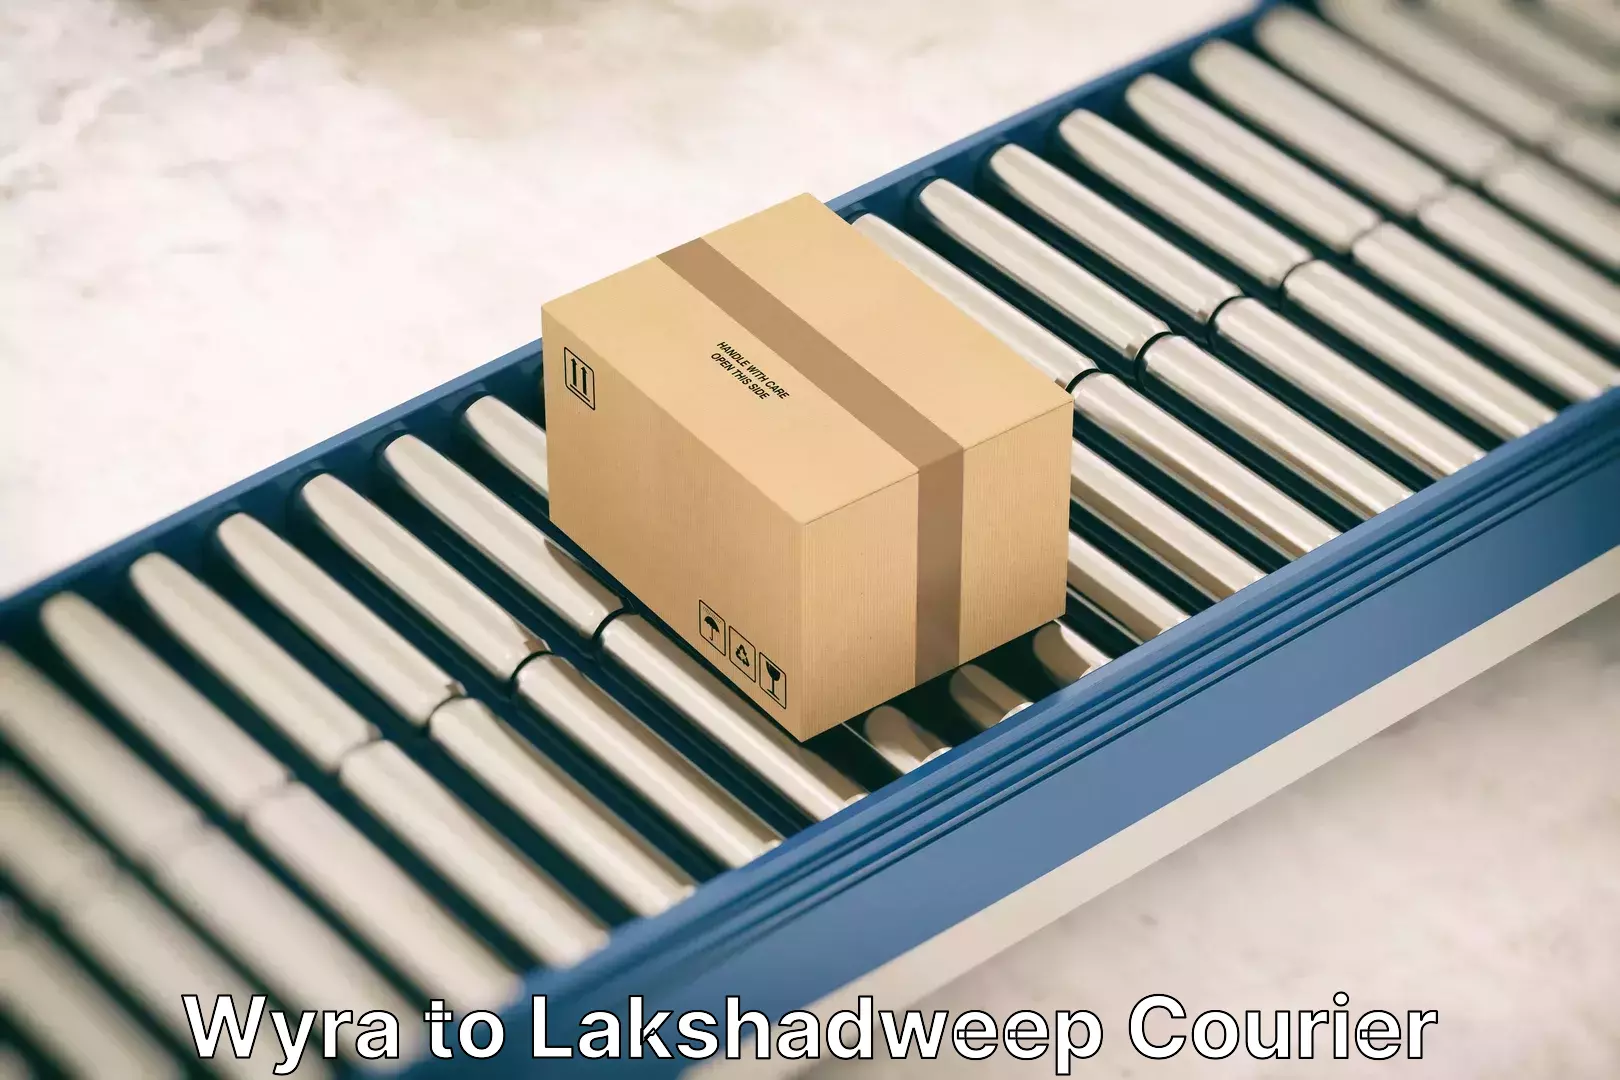 Professional home movers Wyra to Lakshadweep